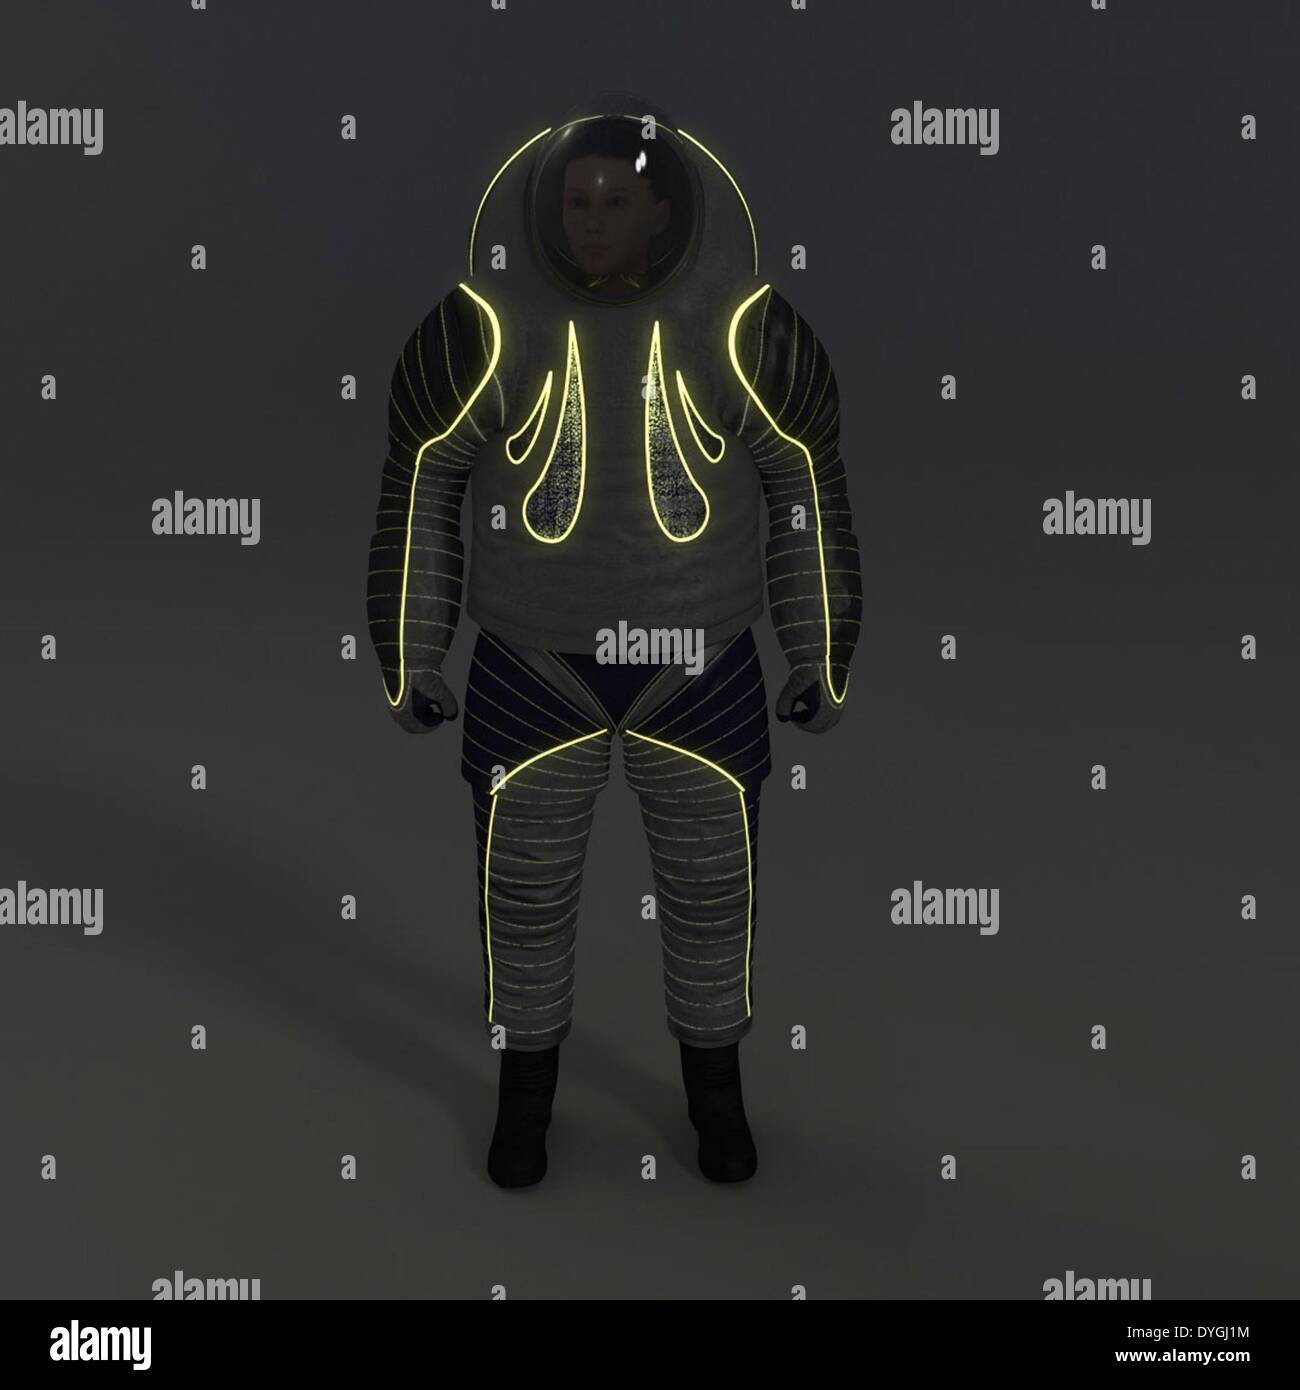 NASA has unveiled three cover layer designs for the Z-2 prototype space suit, the next step in NASA's advanced suit development program. The suit uses Luminex wire and light-emitting patches and the latest advances in technology. Stock Photo